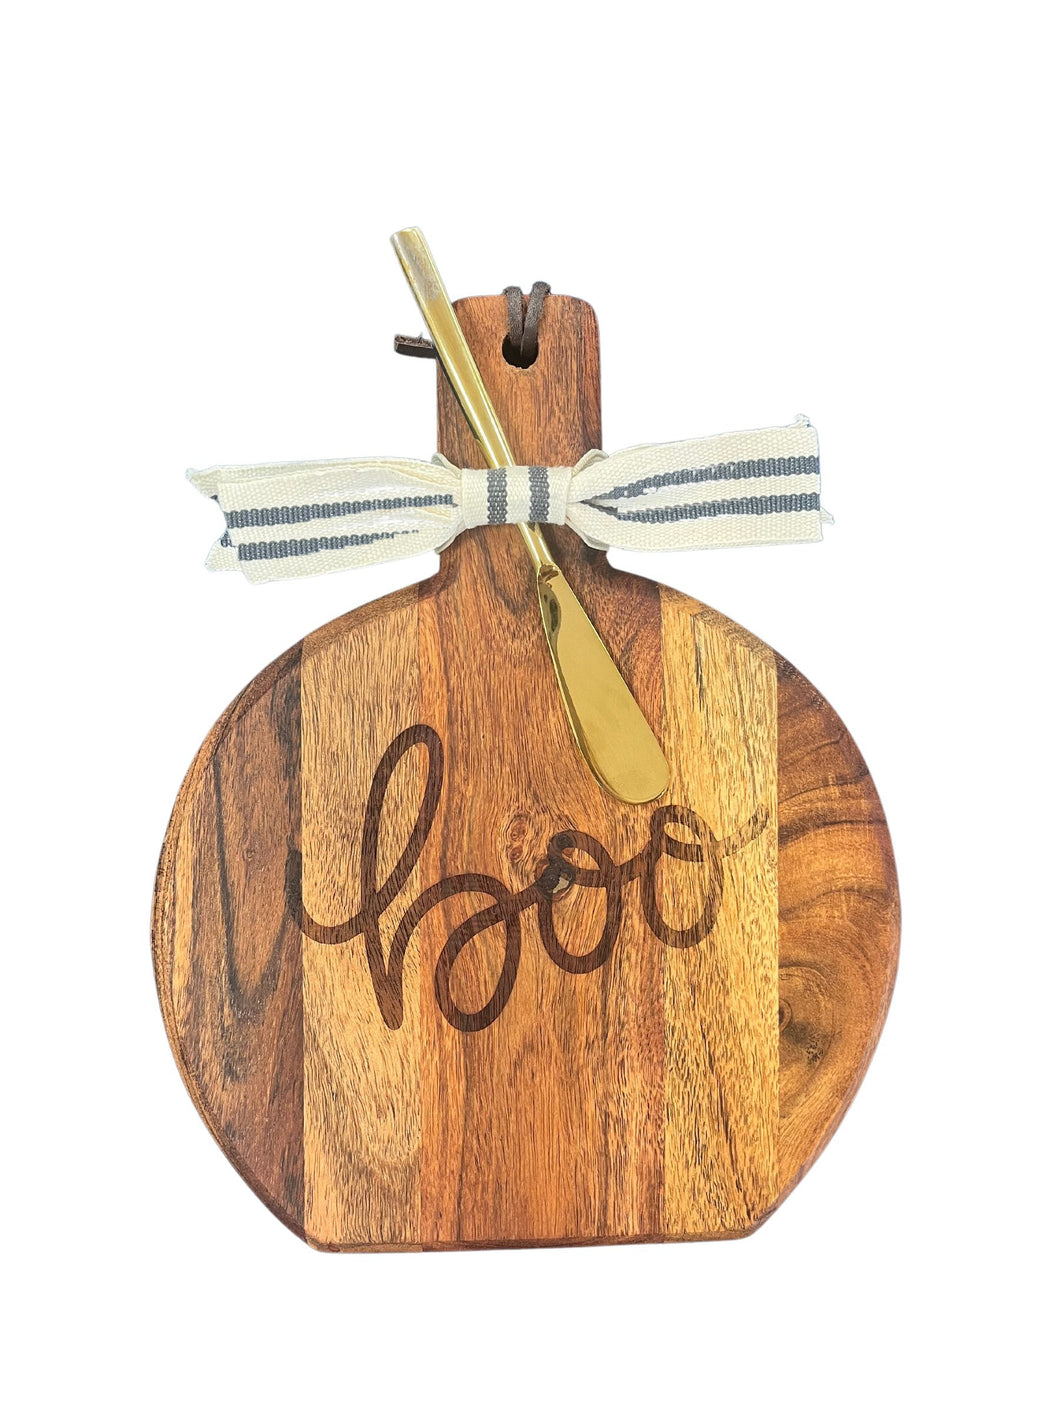 Artisan Maple Paddle Board with Gold Spreader | BOO, 9.75